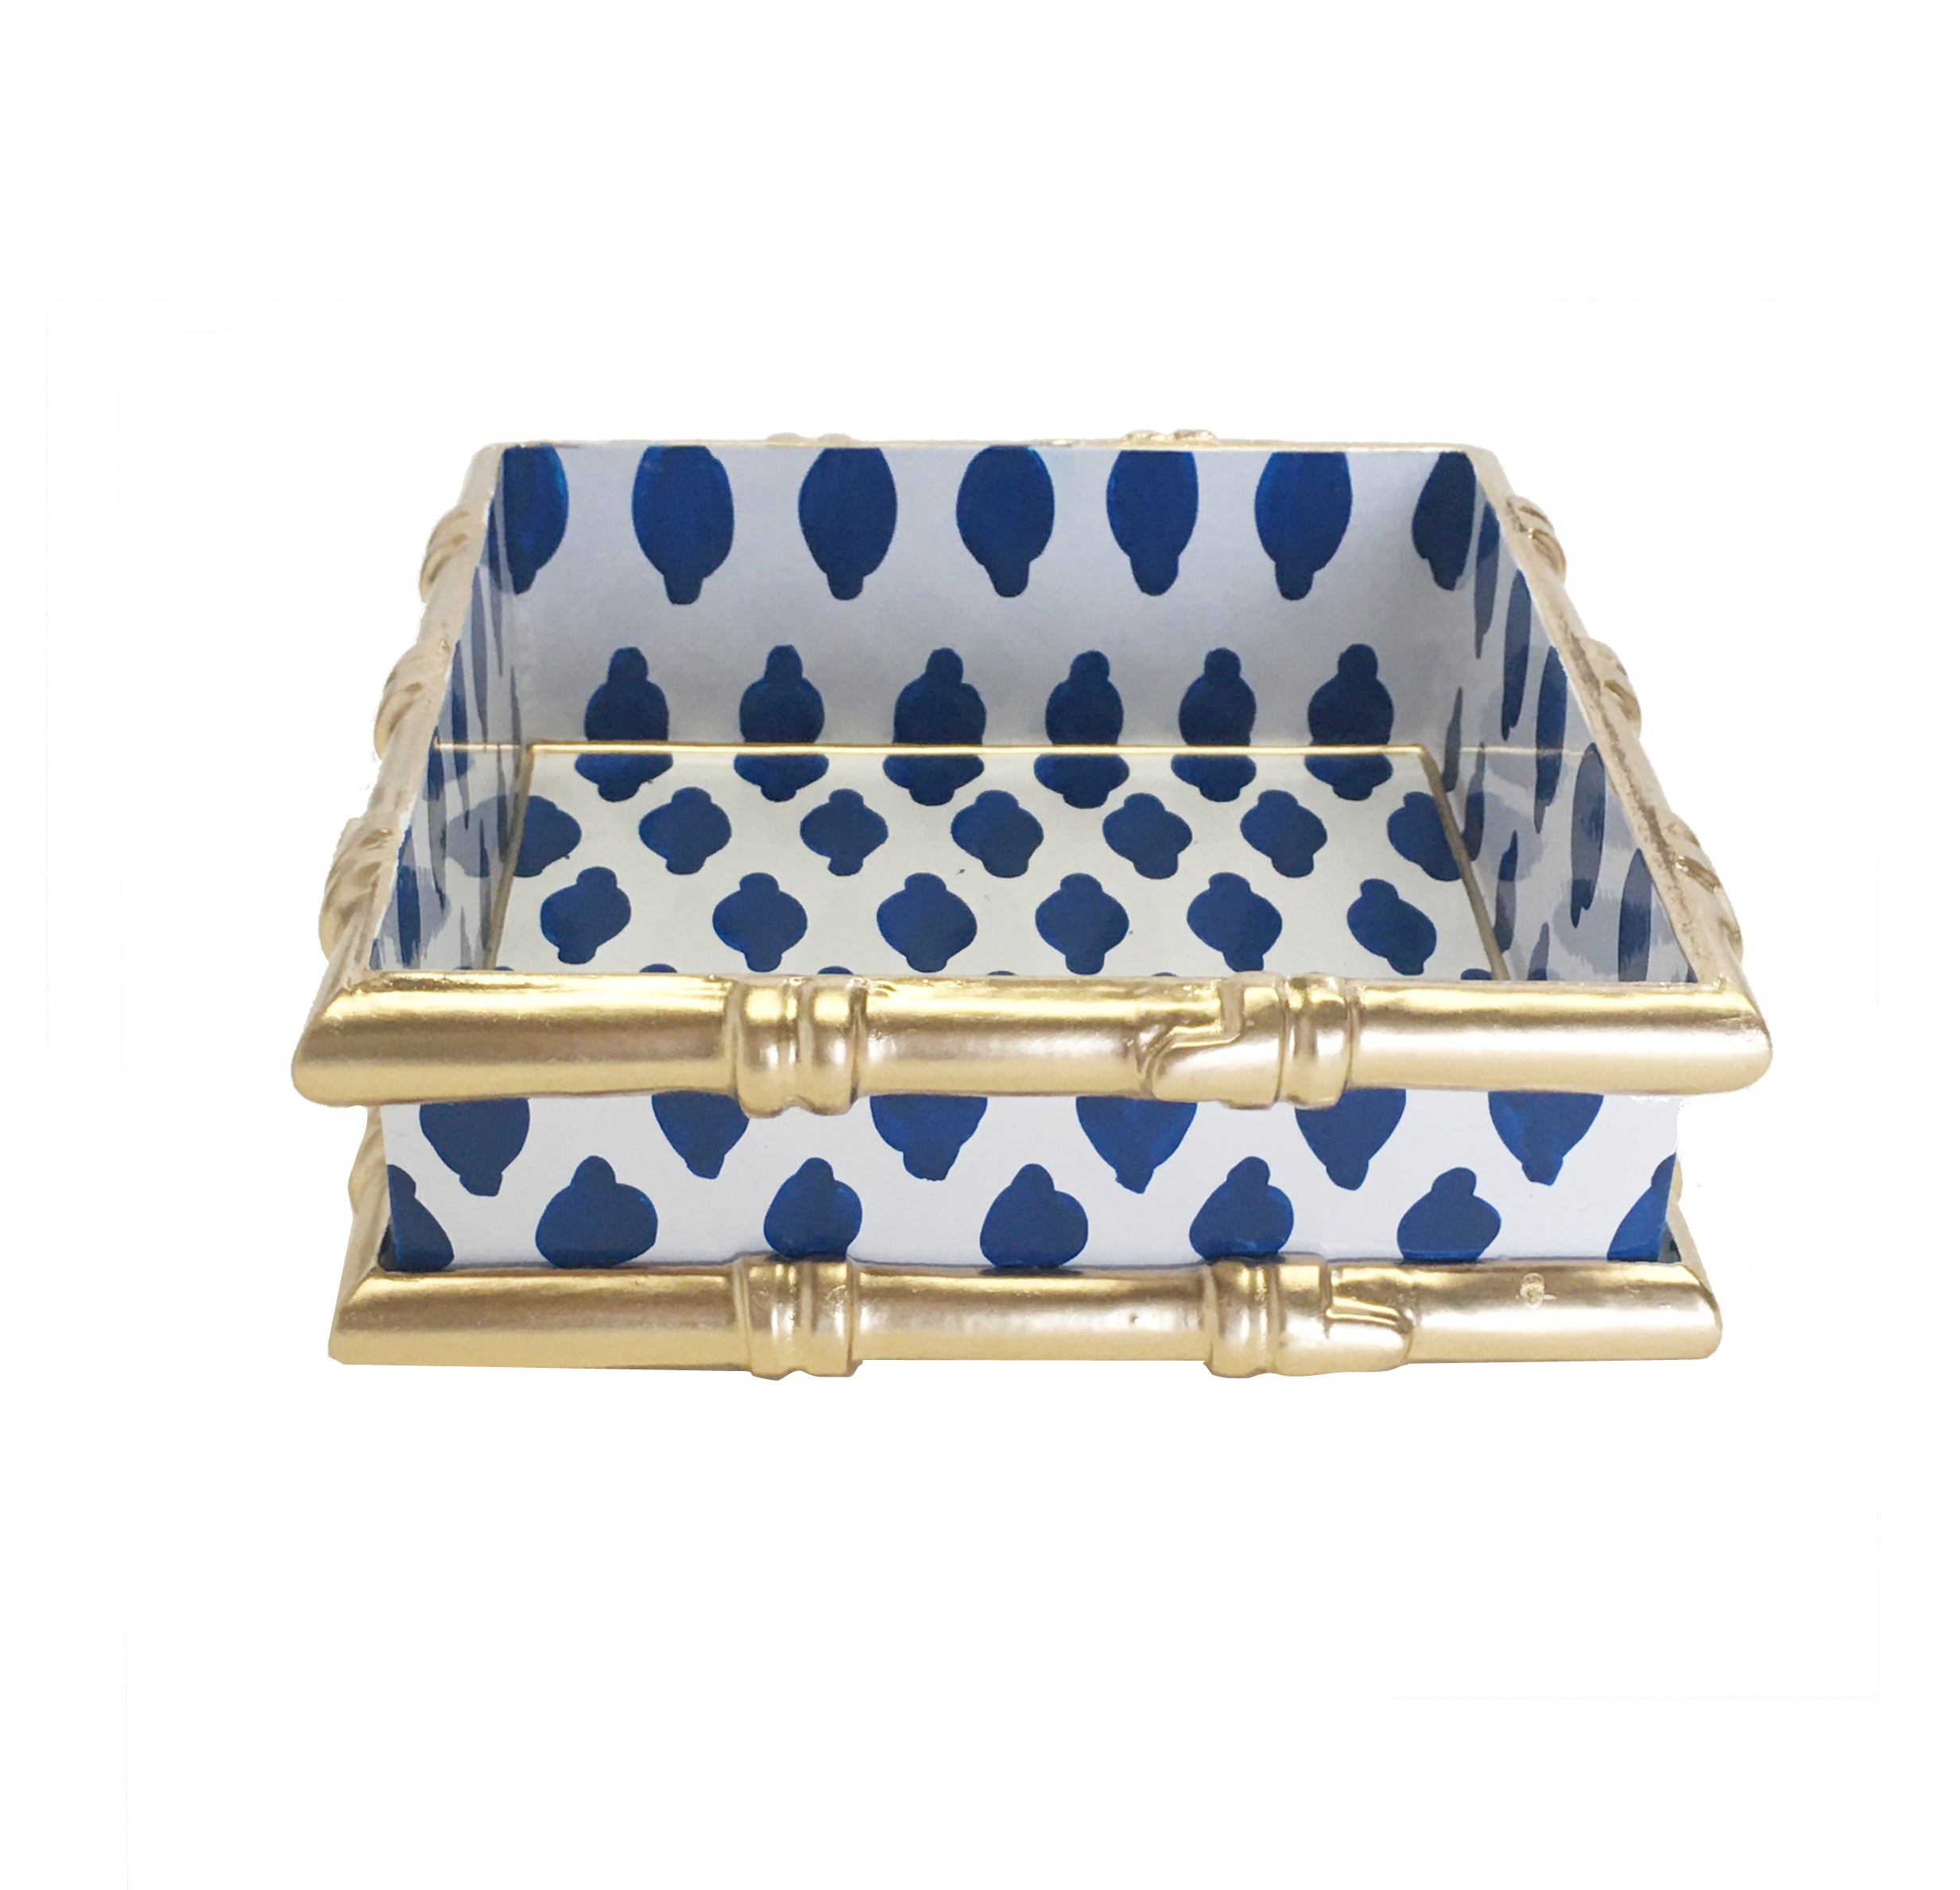 Bamboo in Parsi Navy Square Tray